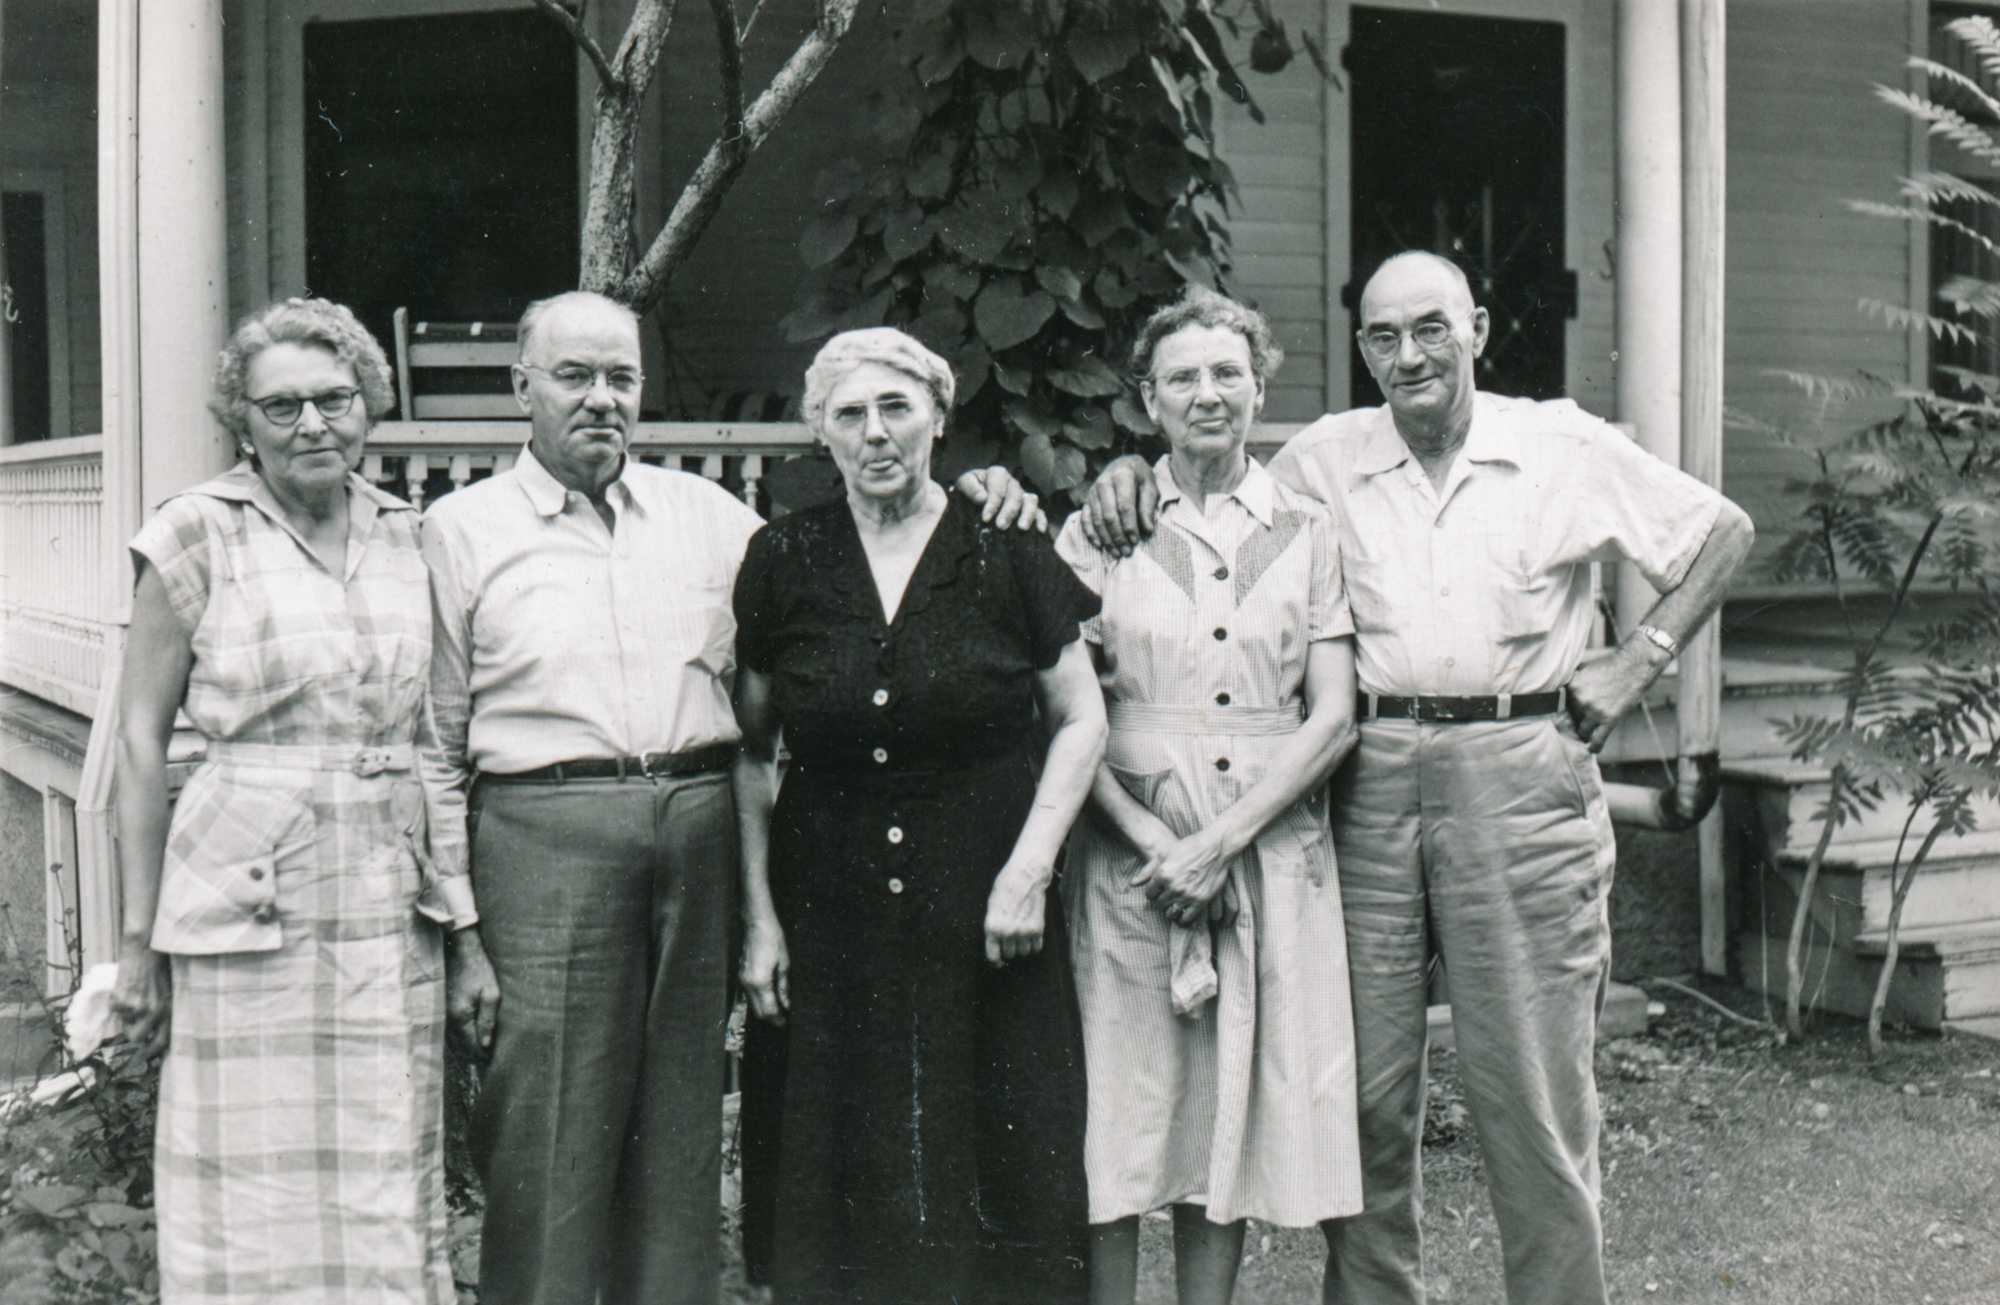 Dauth Family Archive - The Yeaton Siblings Reunion